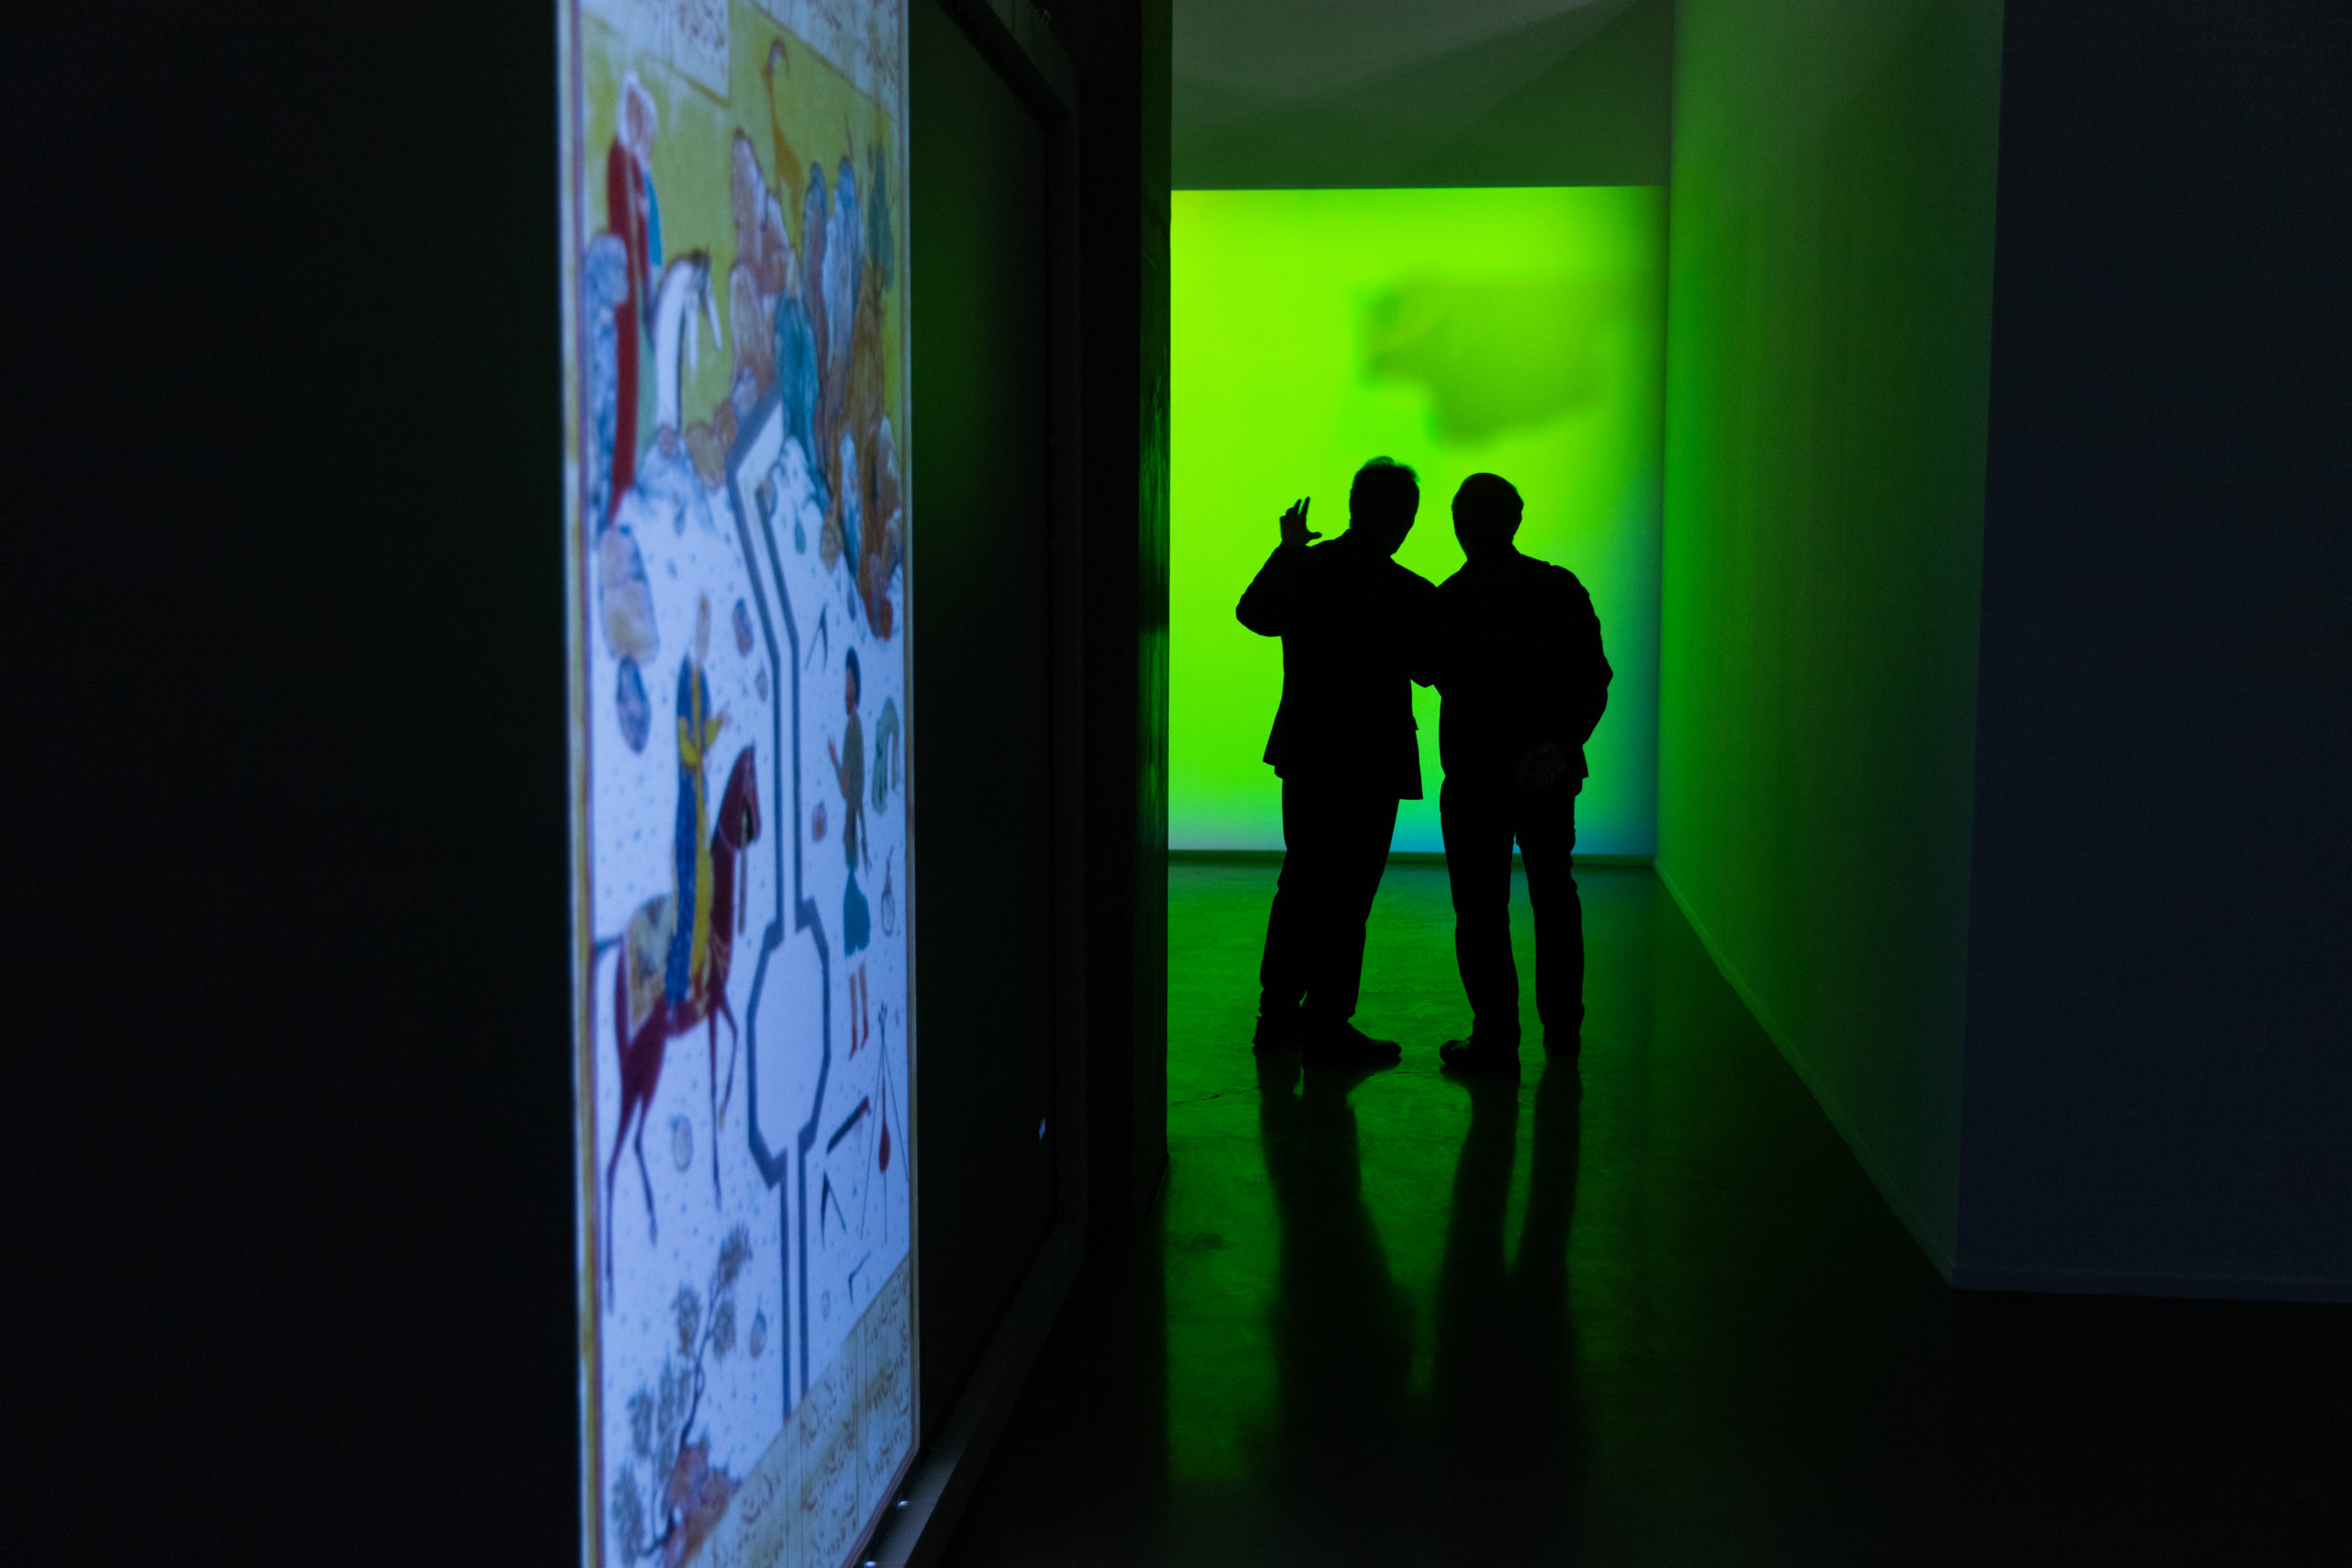 people standing in a dark corridor with a green light looking at an artwork